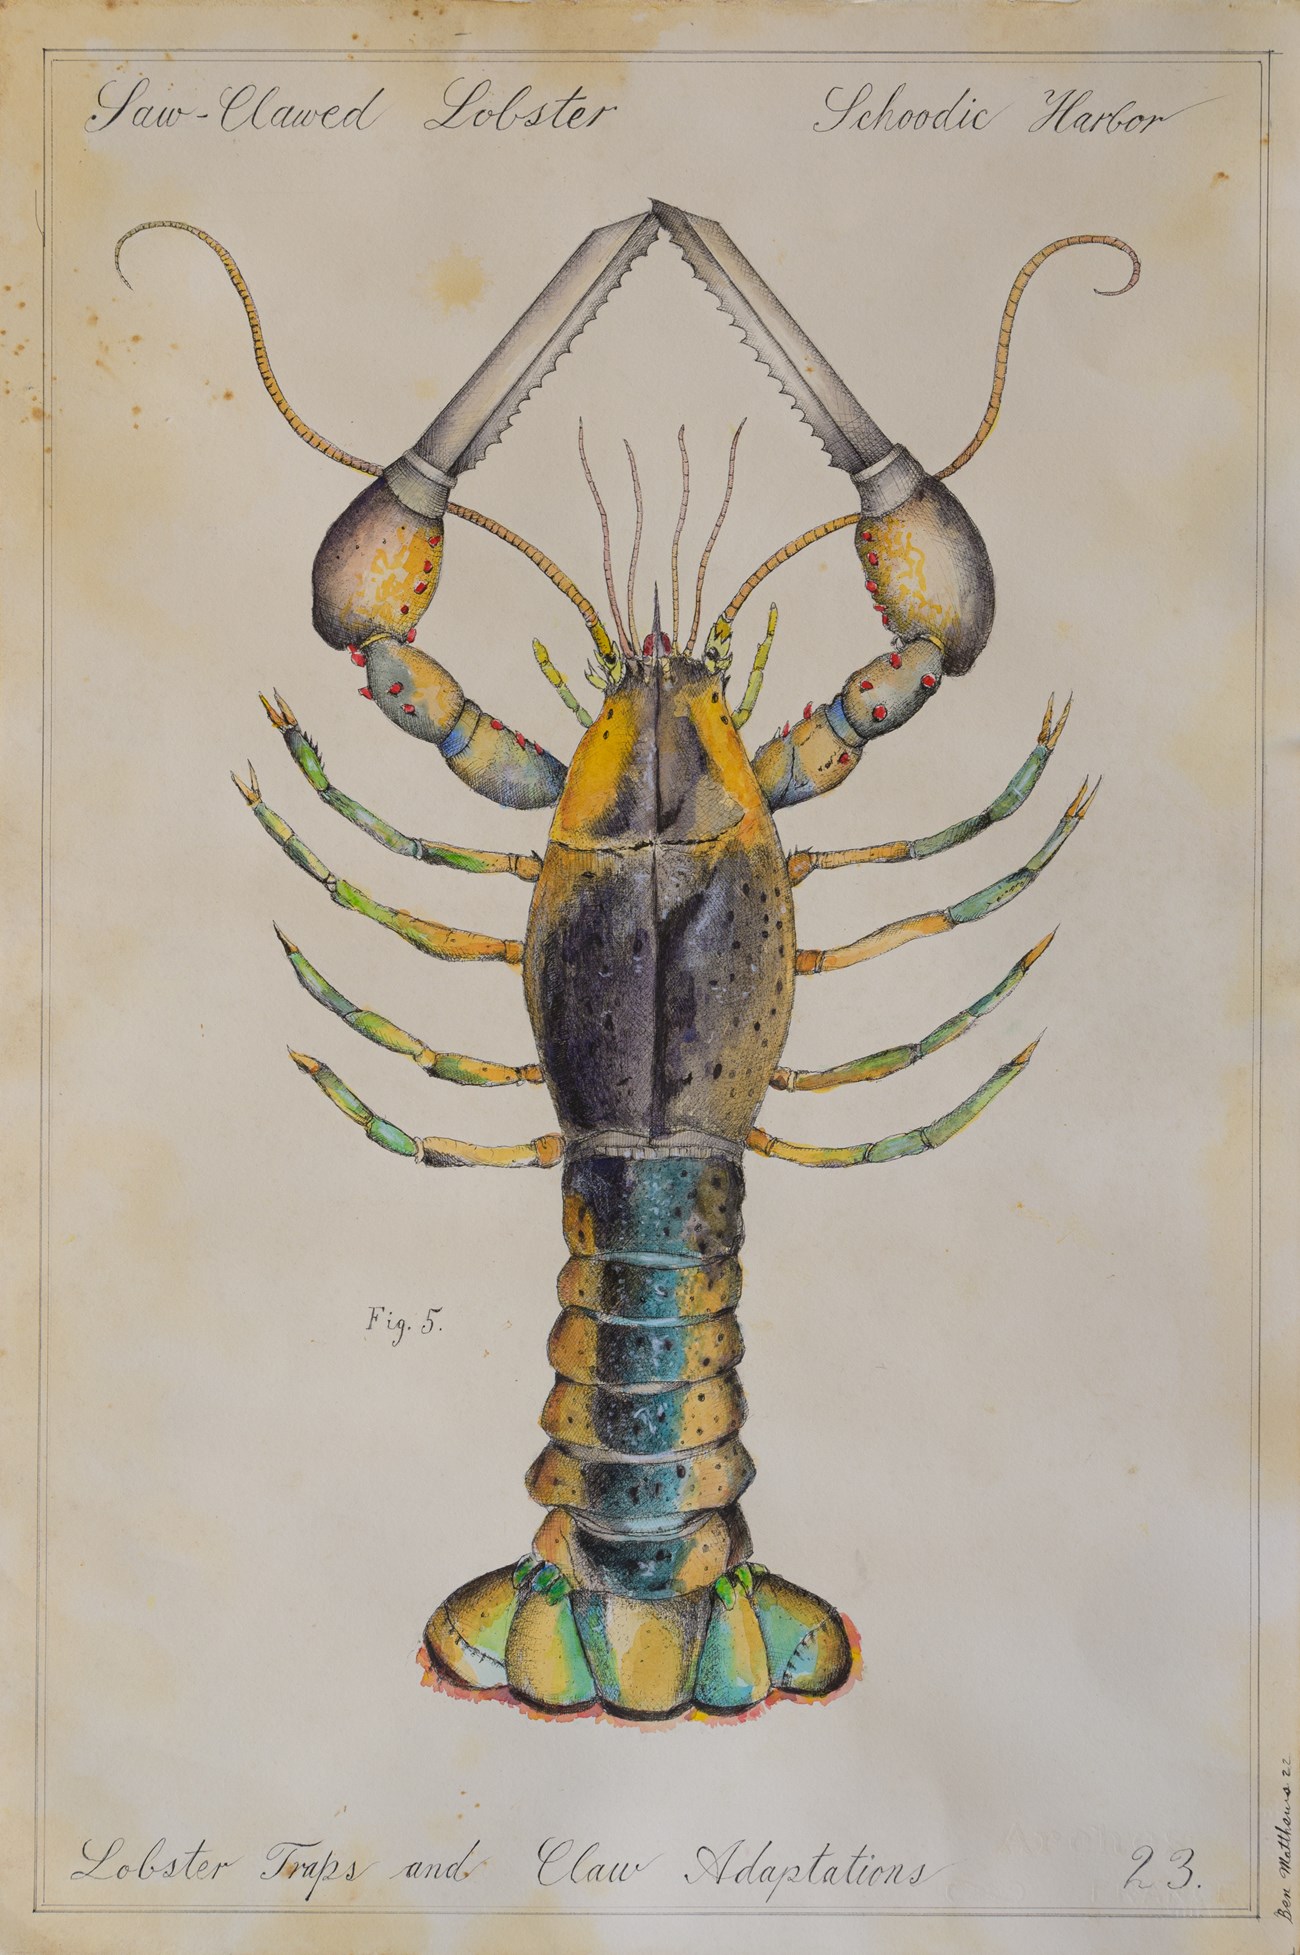 Artwork of a mock field study illustration of a lobster that has adapted saw blades in place of claws